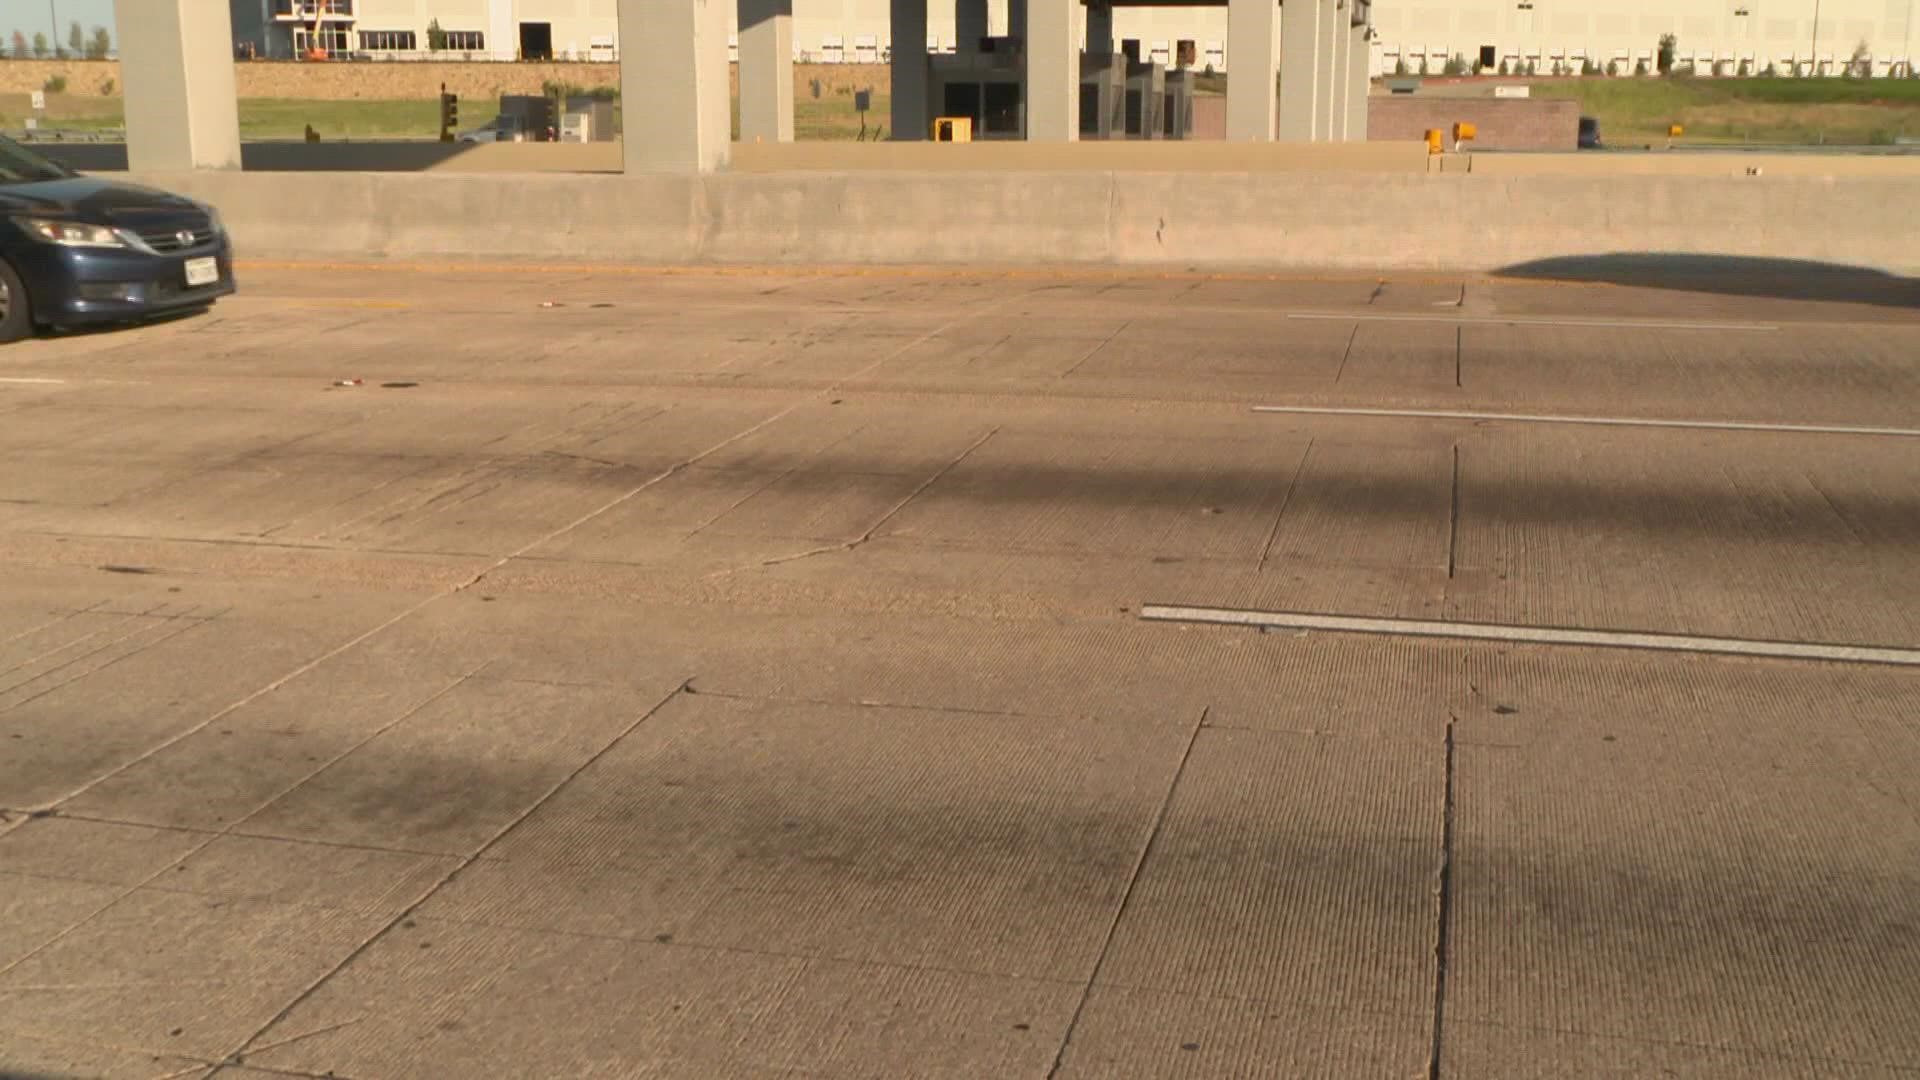 Police in the city of Irving believe wrong-way driver detection technology has already prevented several crashes.